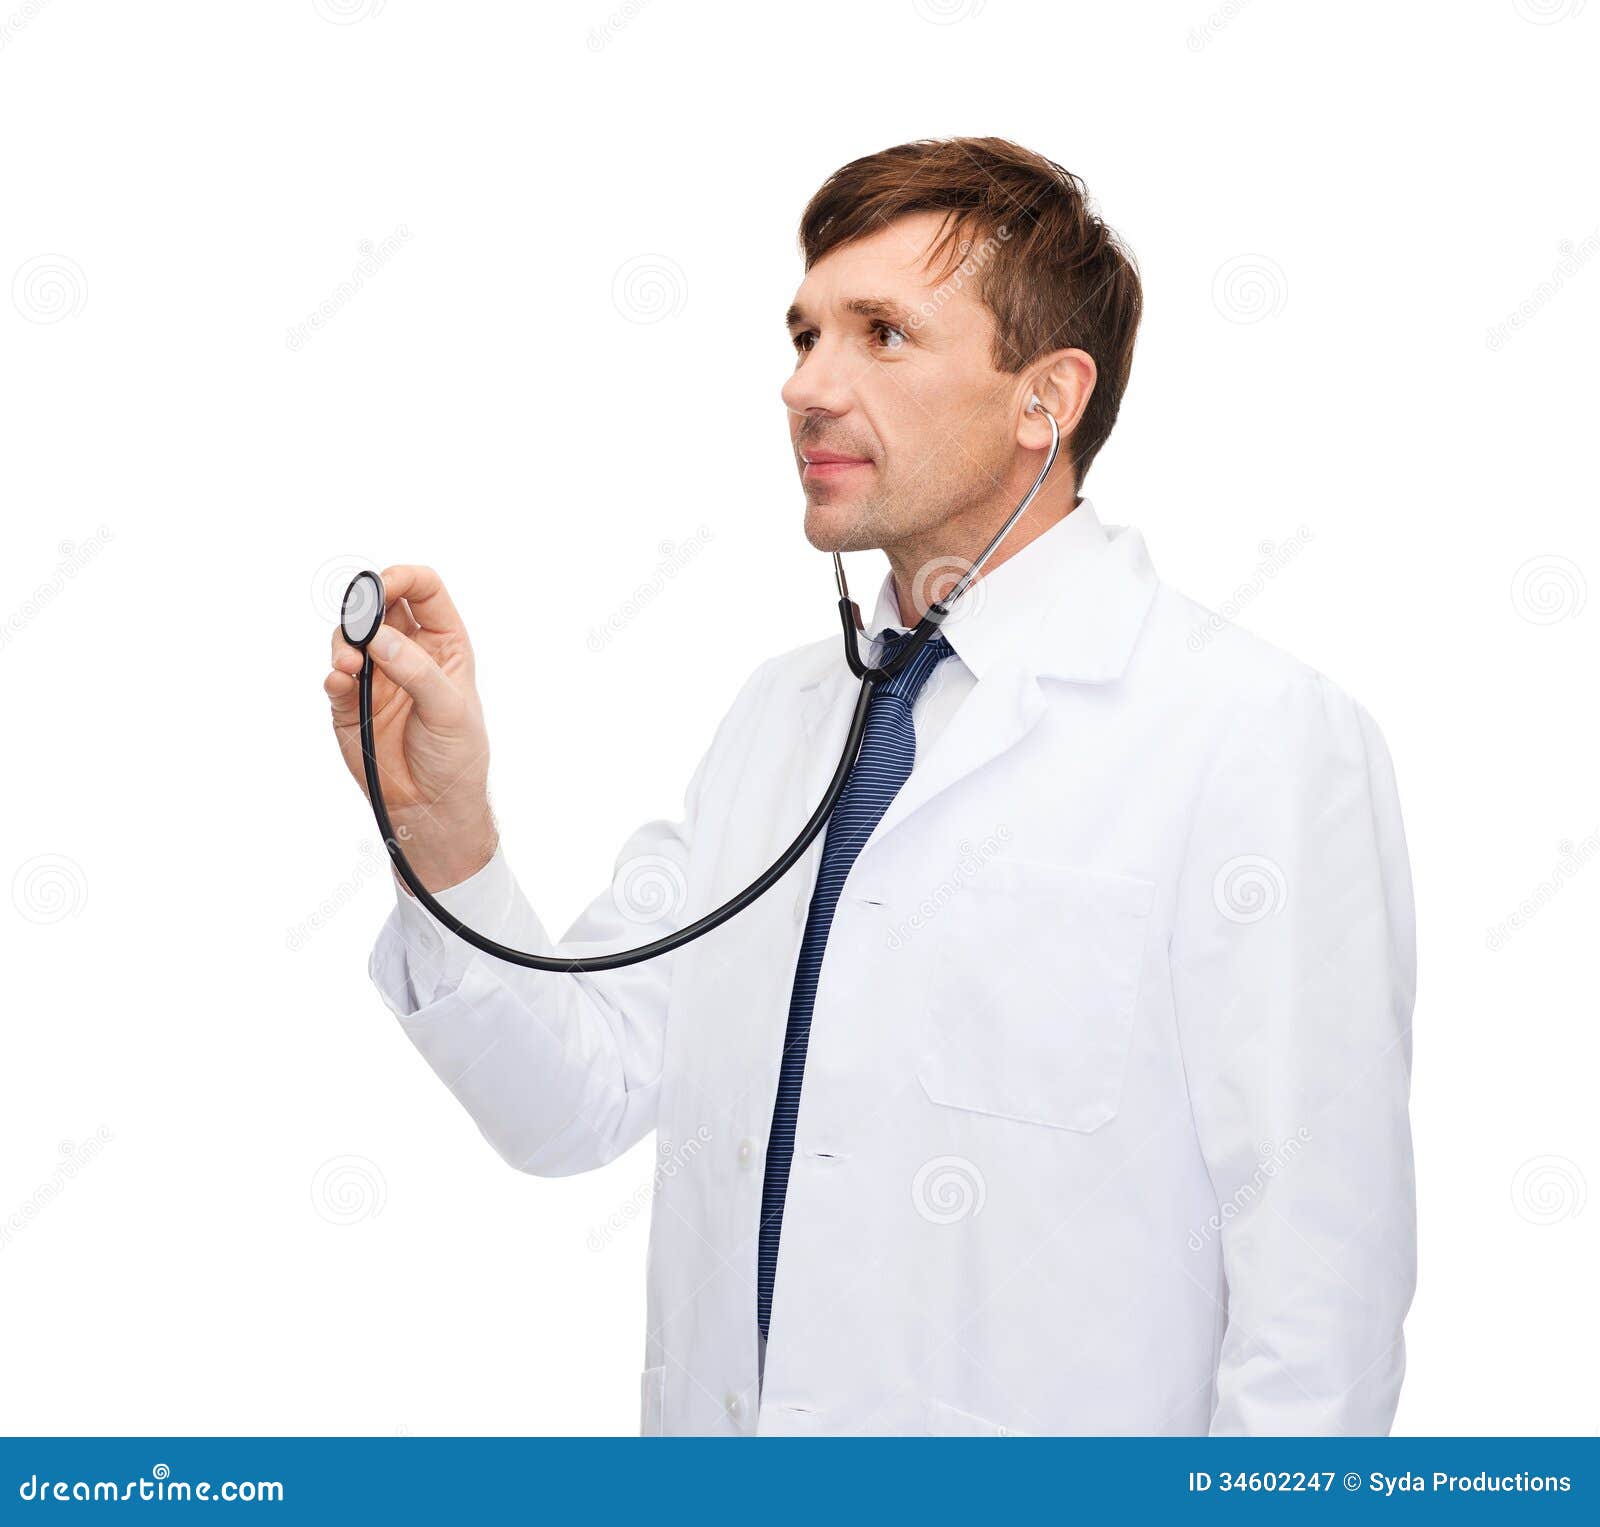 young male doctor stethoscope healthcare medical concept 34602247